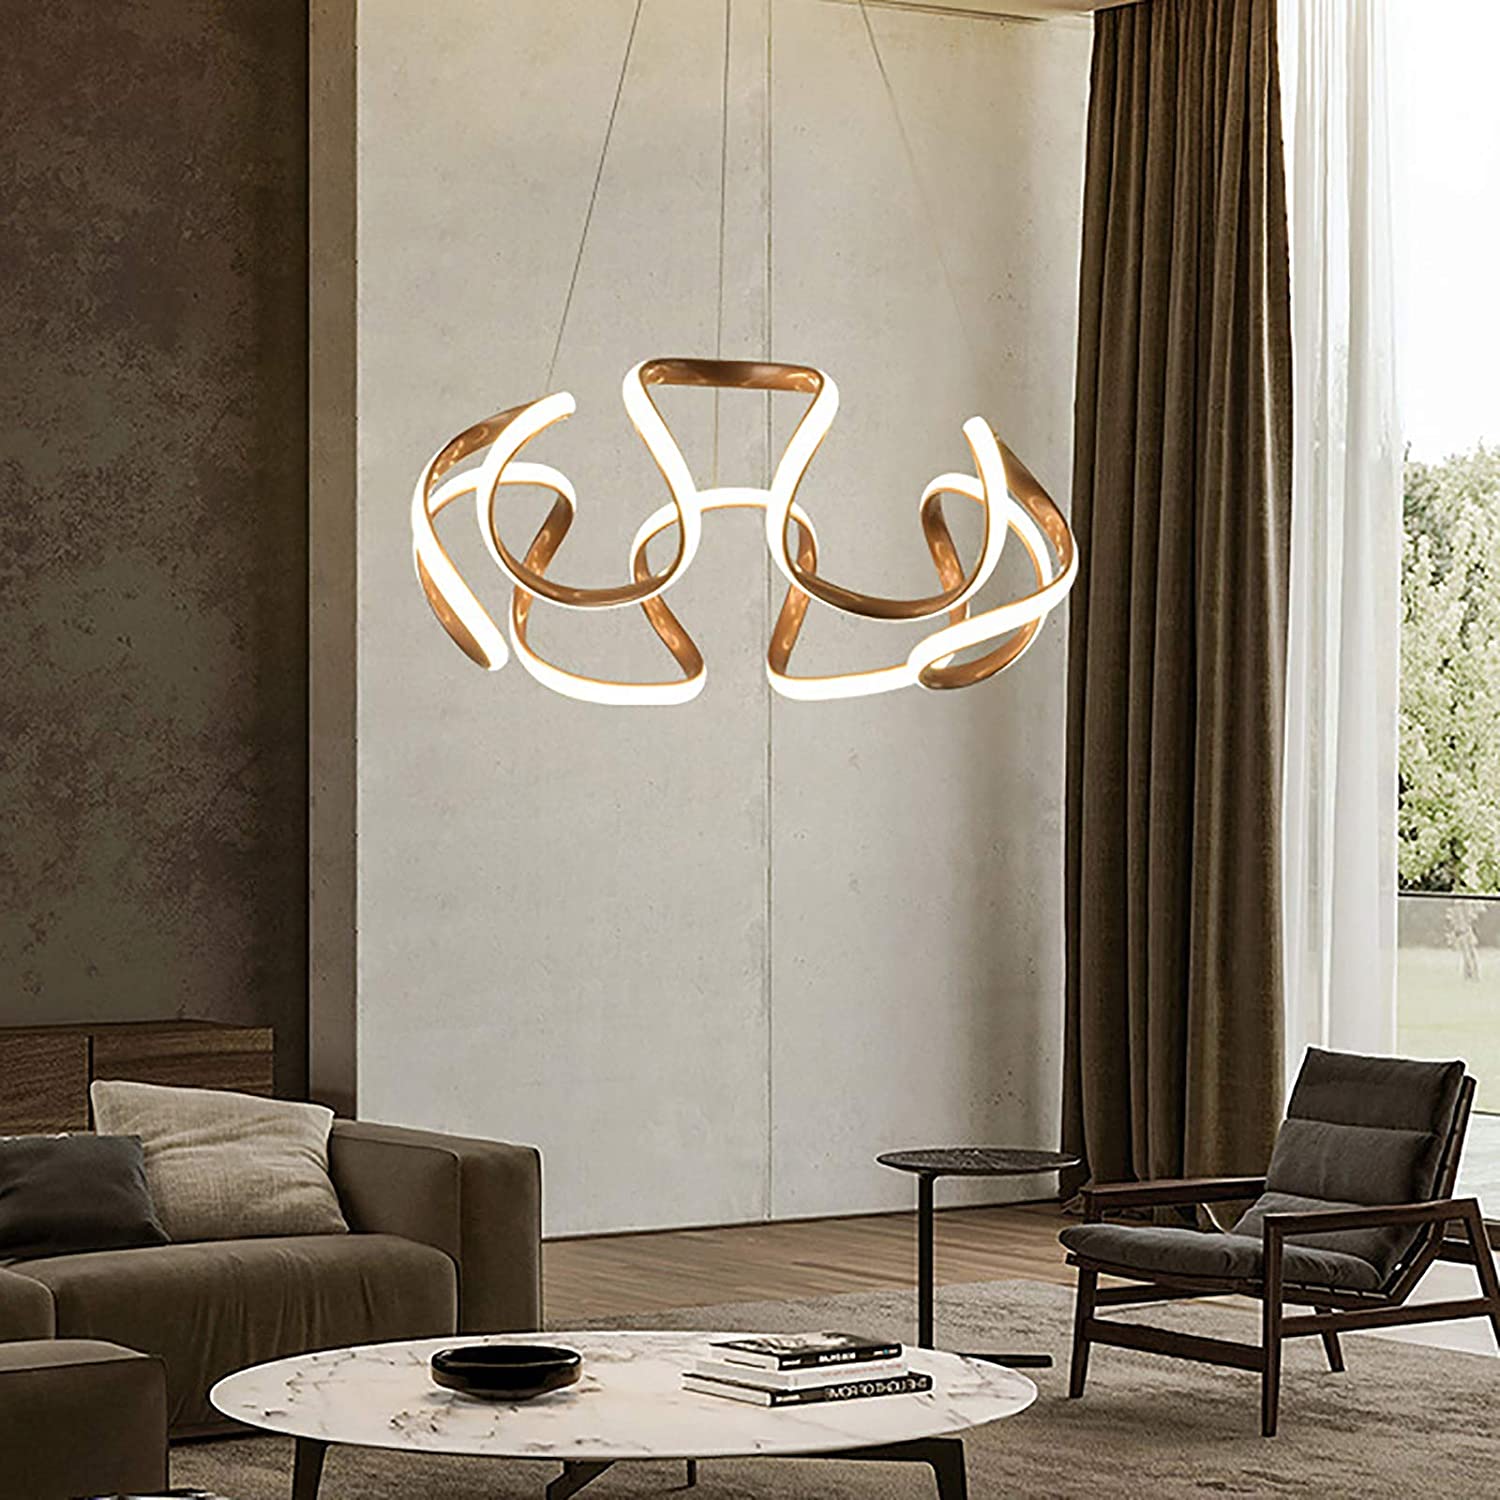 MONIPA LED Ceiling Light Fixture Modern Champagne Gold Pendant Light Stepless Dimming with Remote Control for Living Room Dining Kitchen Bar Table Lamp - image 3 of 7